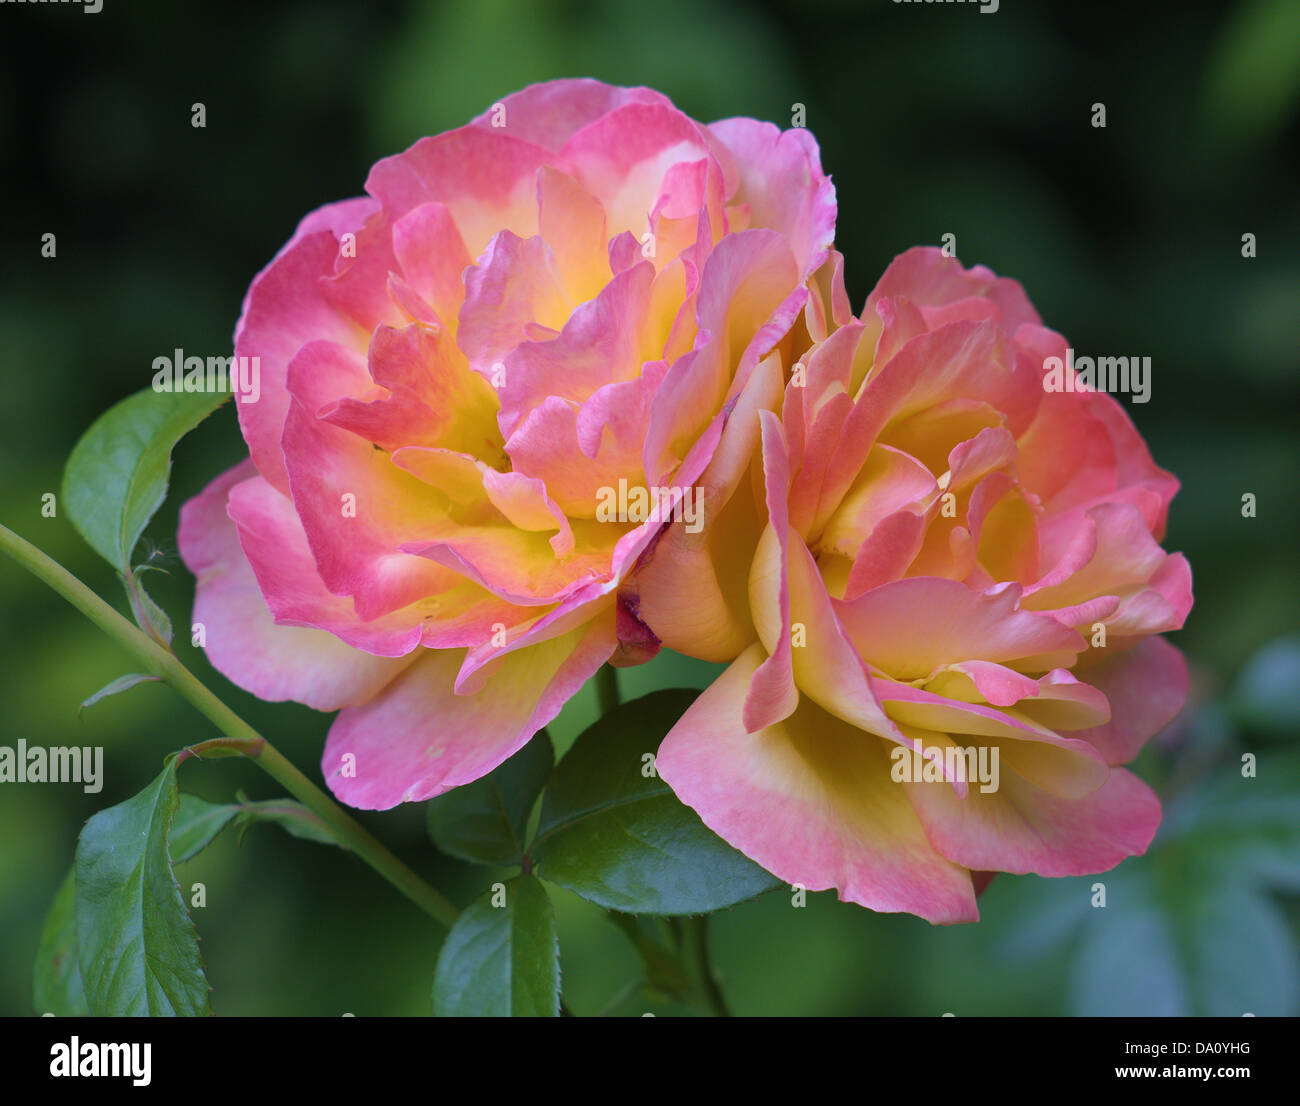 Two pink and yellow roses delicate charming fragrant Stock Photo